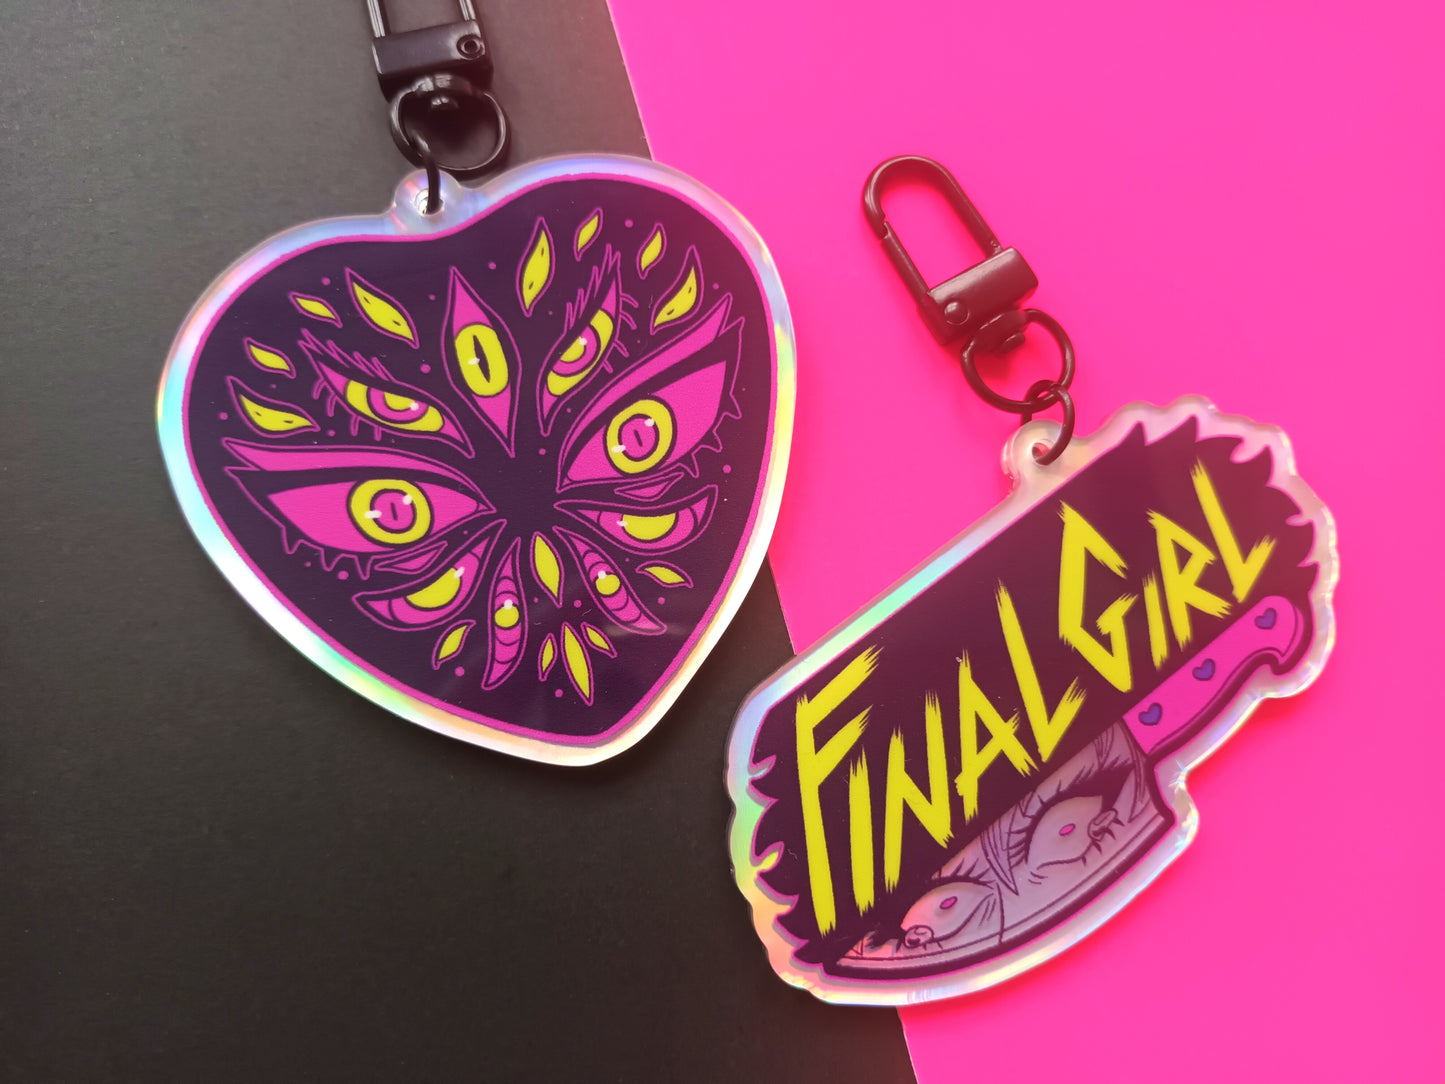 2.5 inch Holographic Final Girl / Heart Eyes Double Sided Acrylic Charms